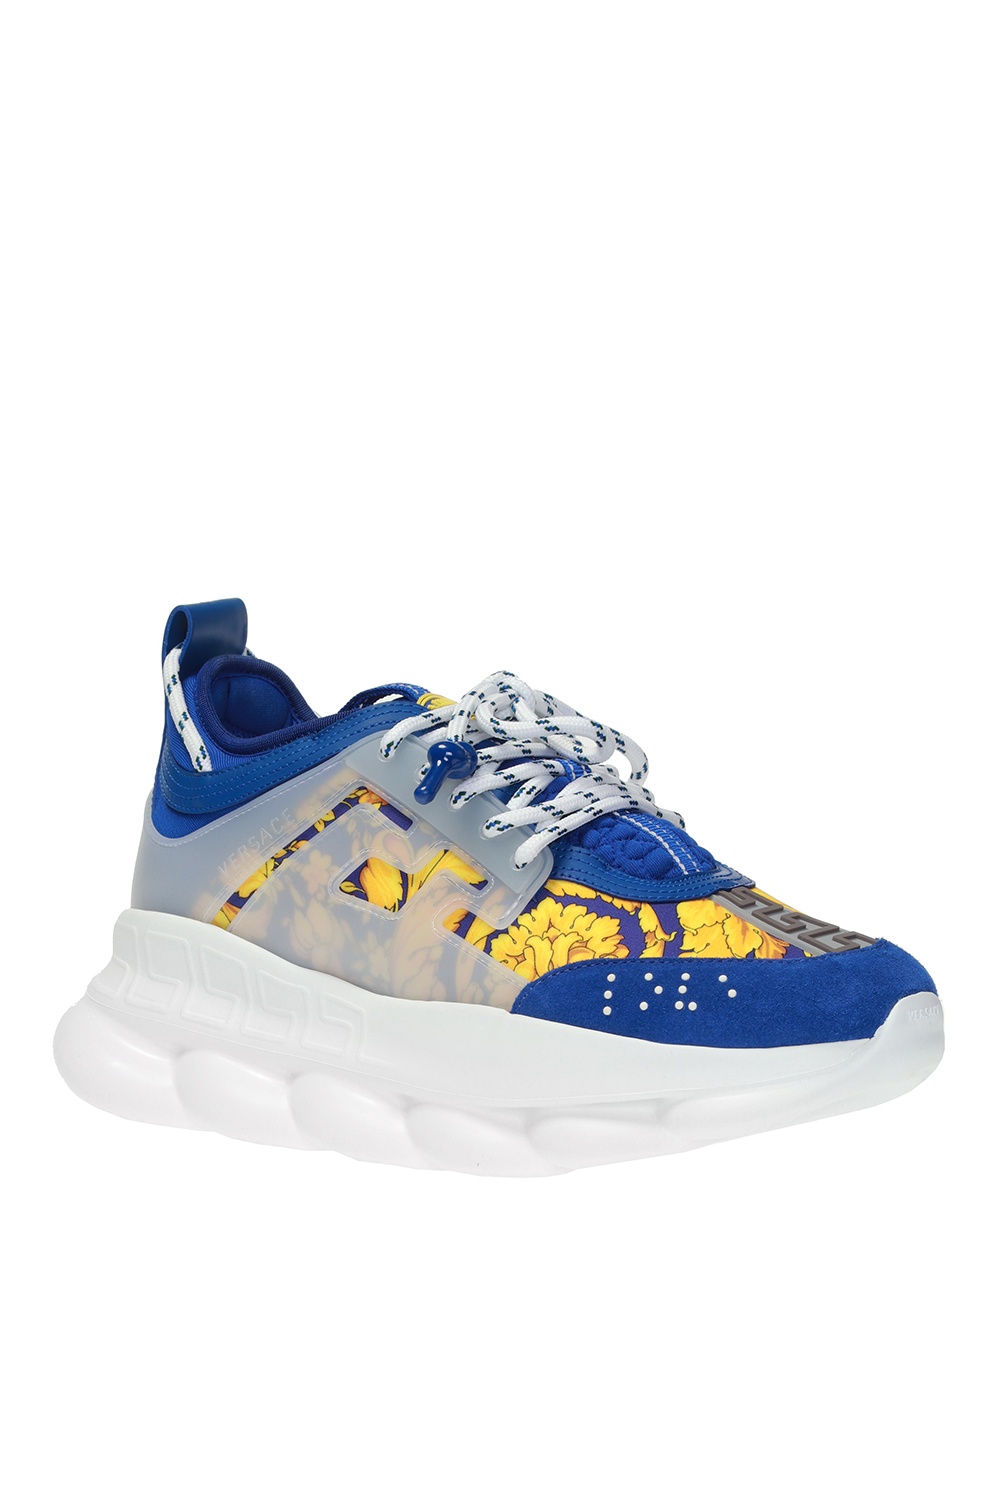 Versace 'The Chain Reaction' sneakers, Men's Shoes